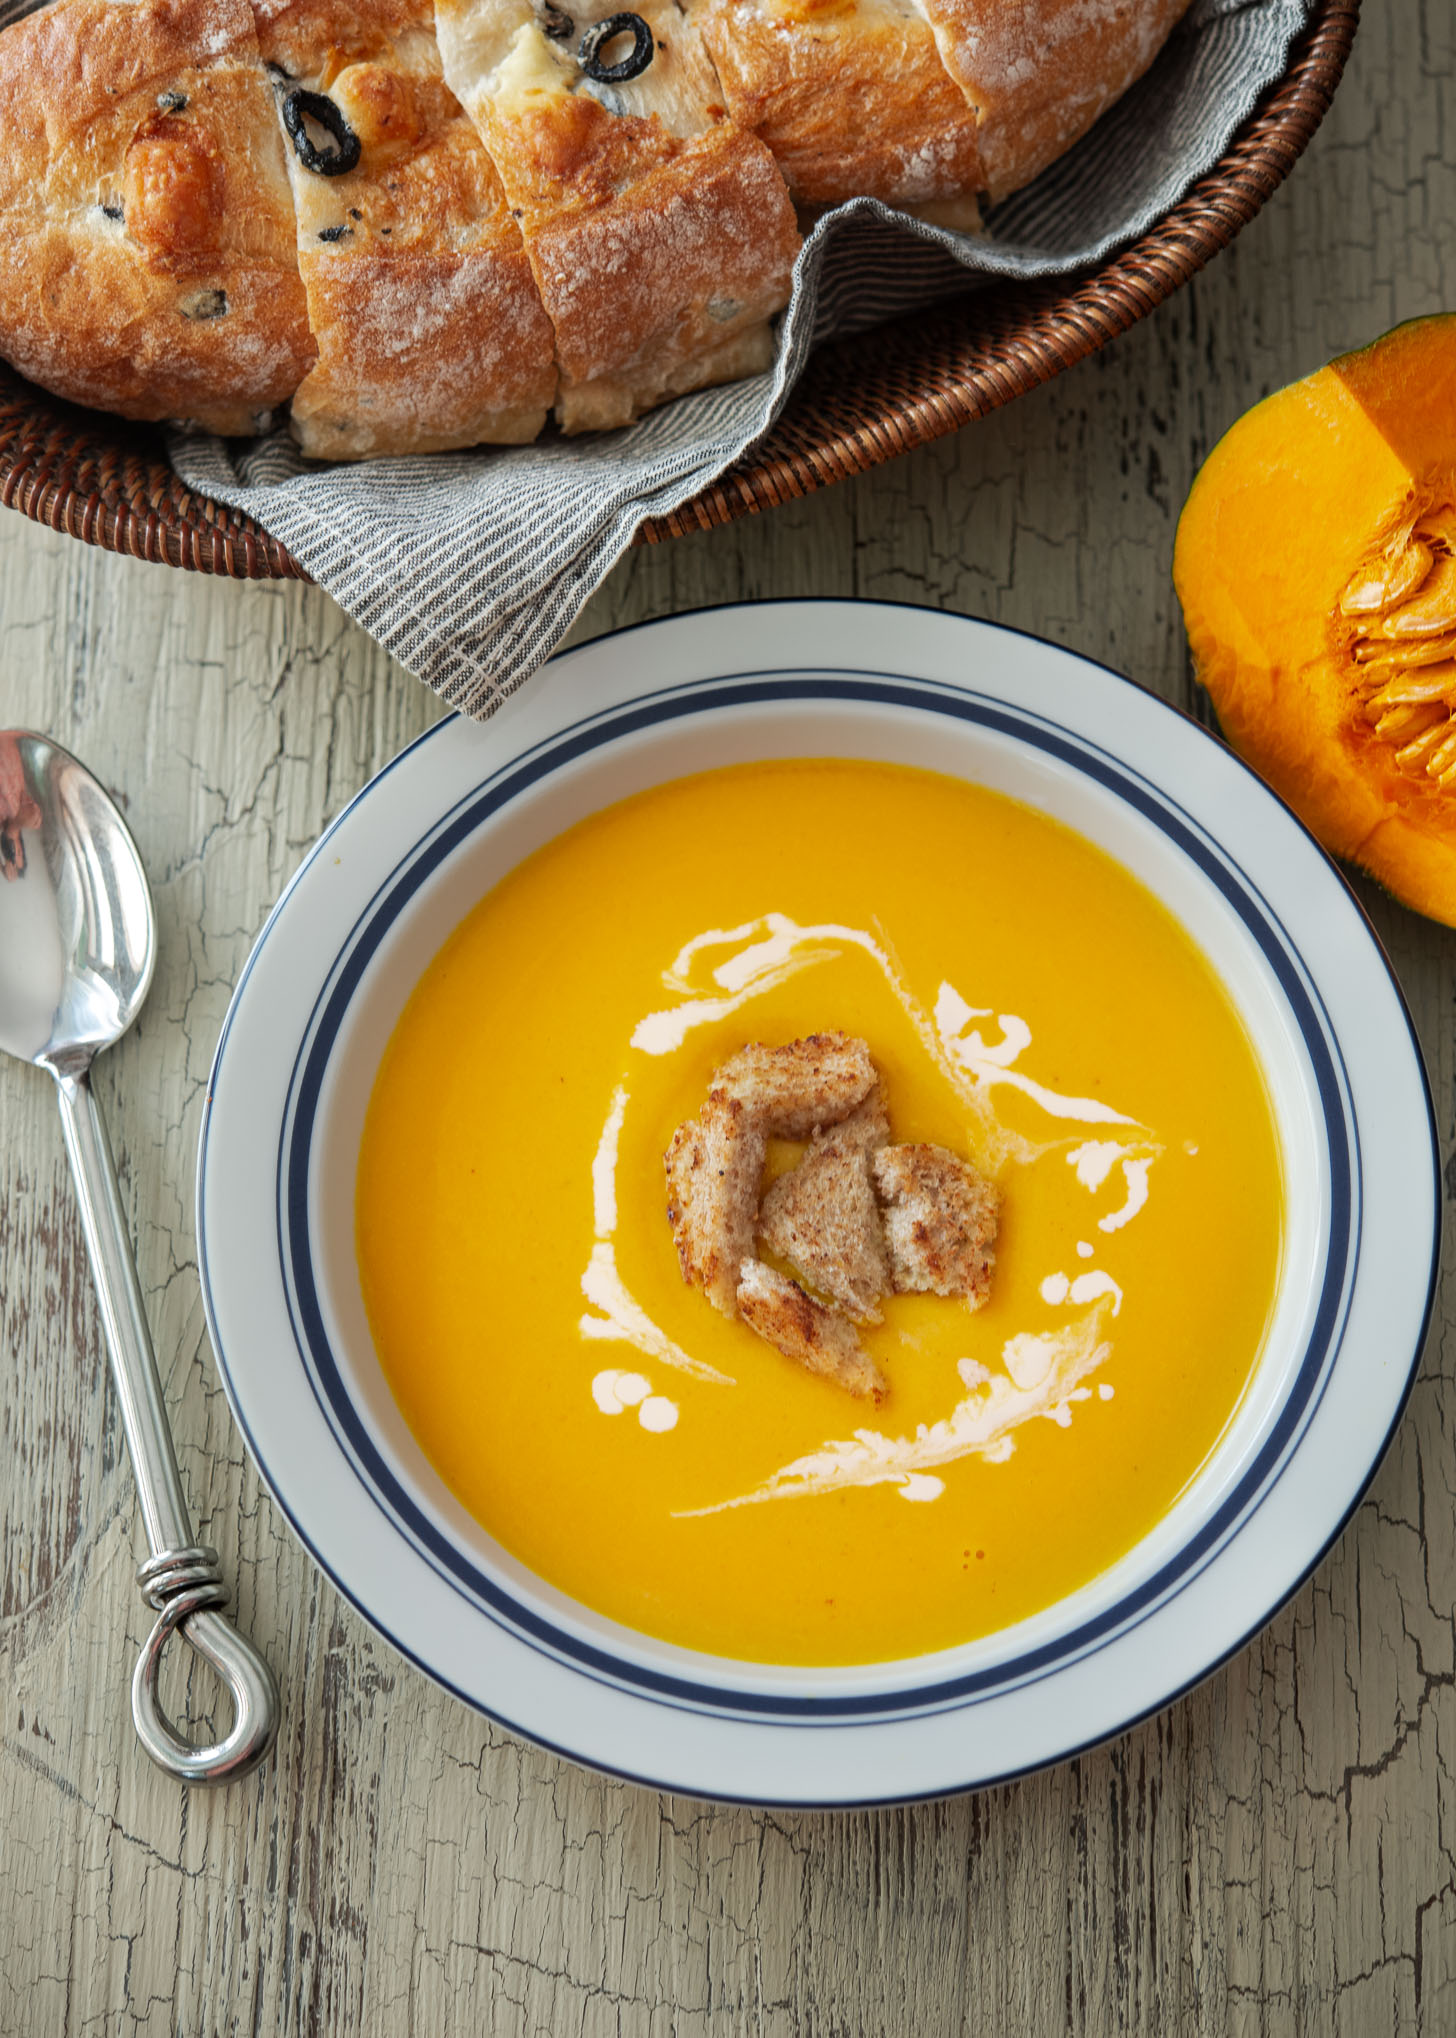 A bowl of kabocha squash soup garnished and served with crusty bread.